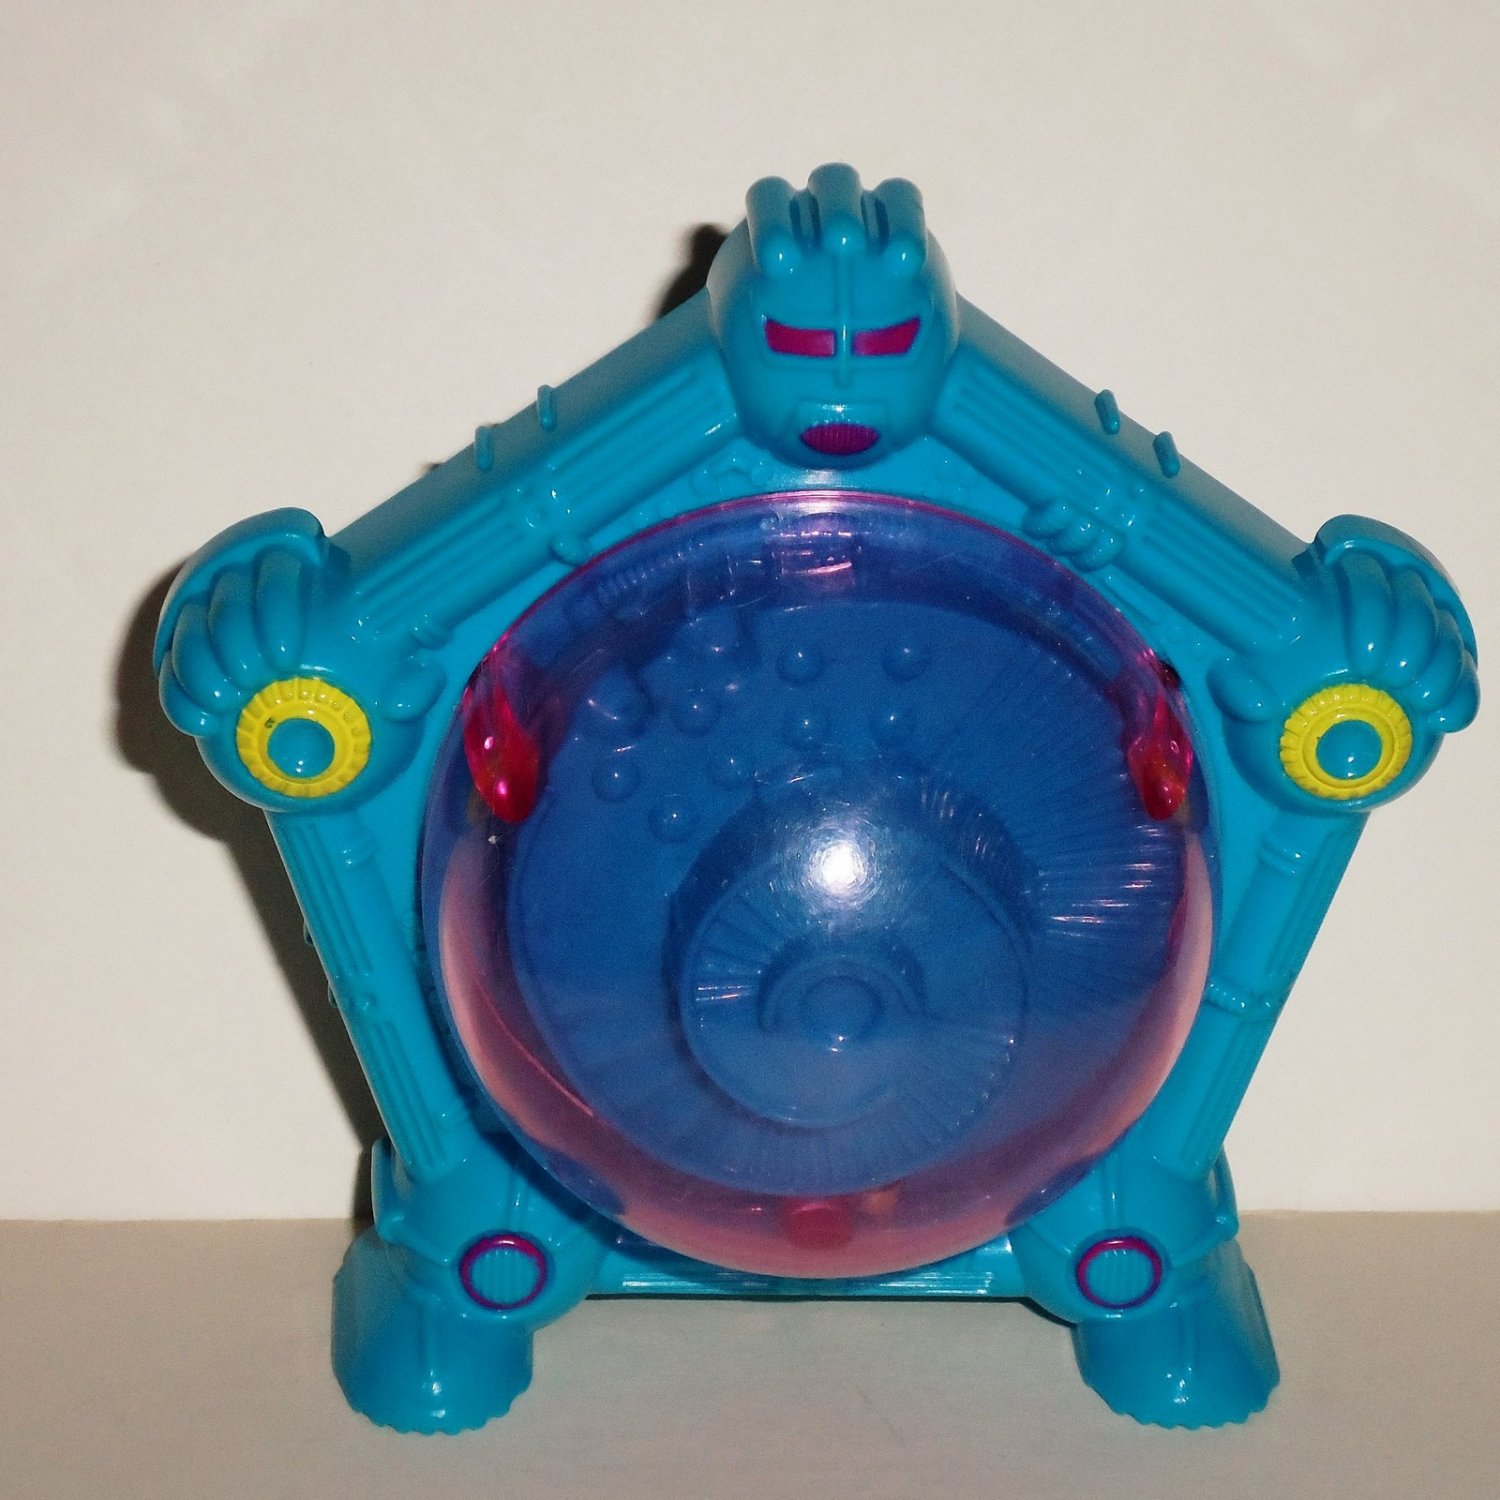 Wendy's 1996 Robot Games Blue Maze Kids Meal Toy Loose Used